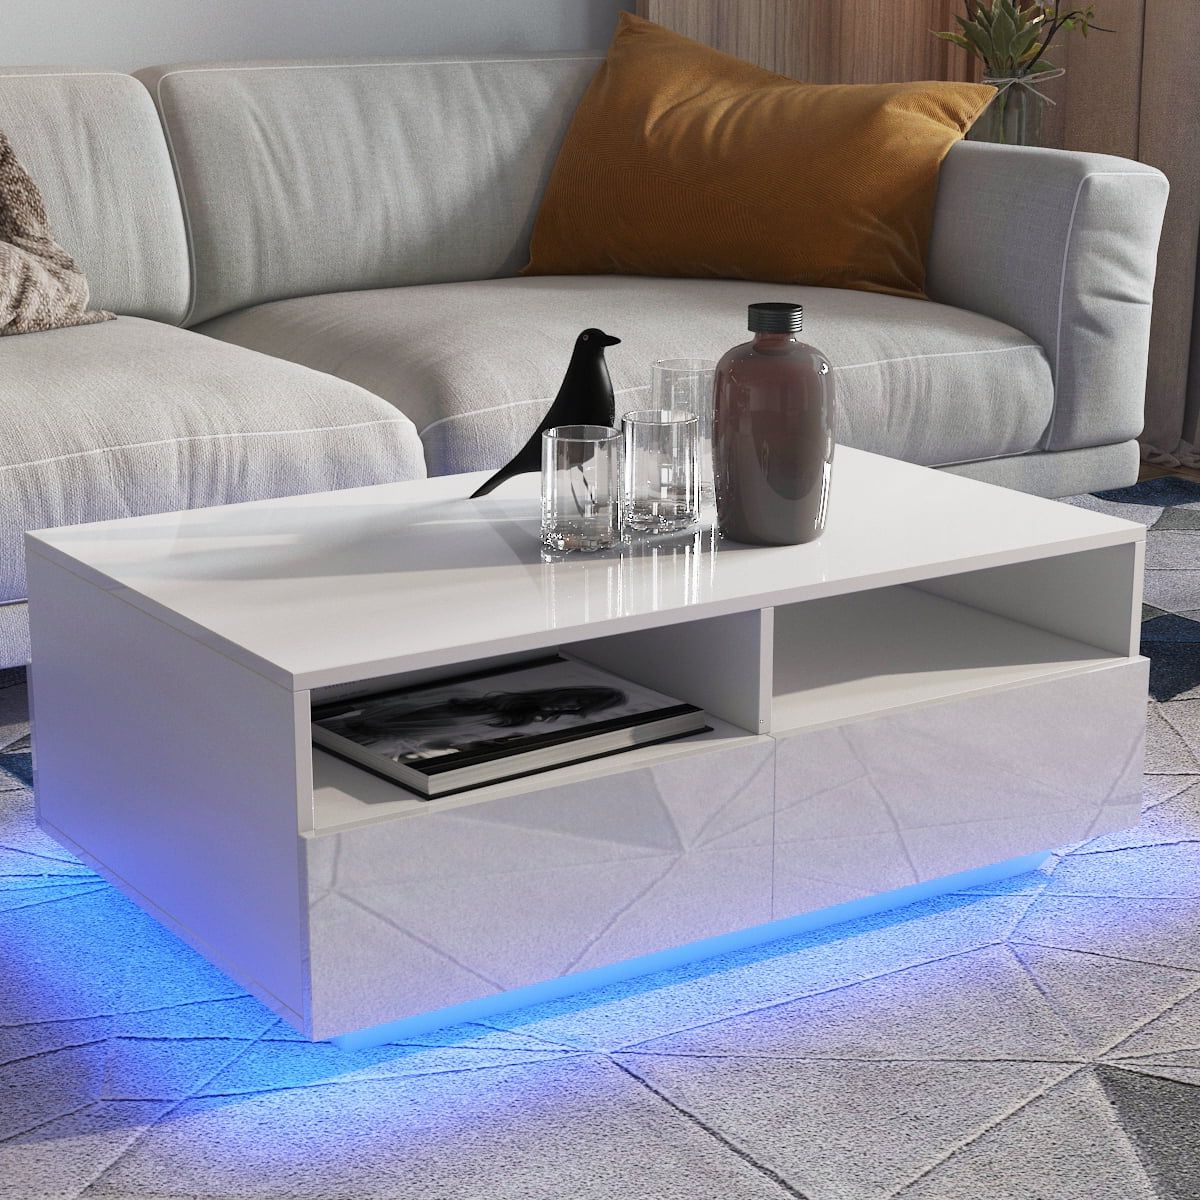 Hommpa Coffee Table With 4 Drawers And Open Shelf Led Center Table Sofa Side  Tea Tables White High Gloss Finish – Walmart Regarding Best And Newest Led Coffee Tables With 4 Drawers (View 4 of 10)